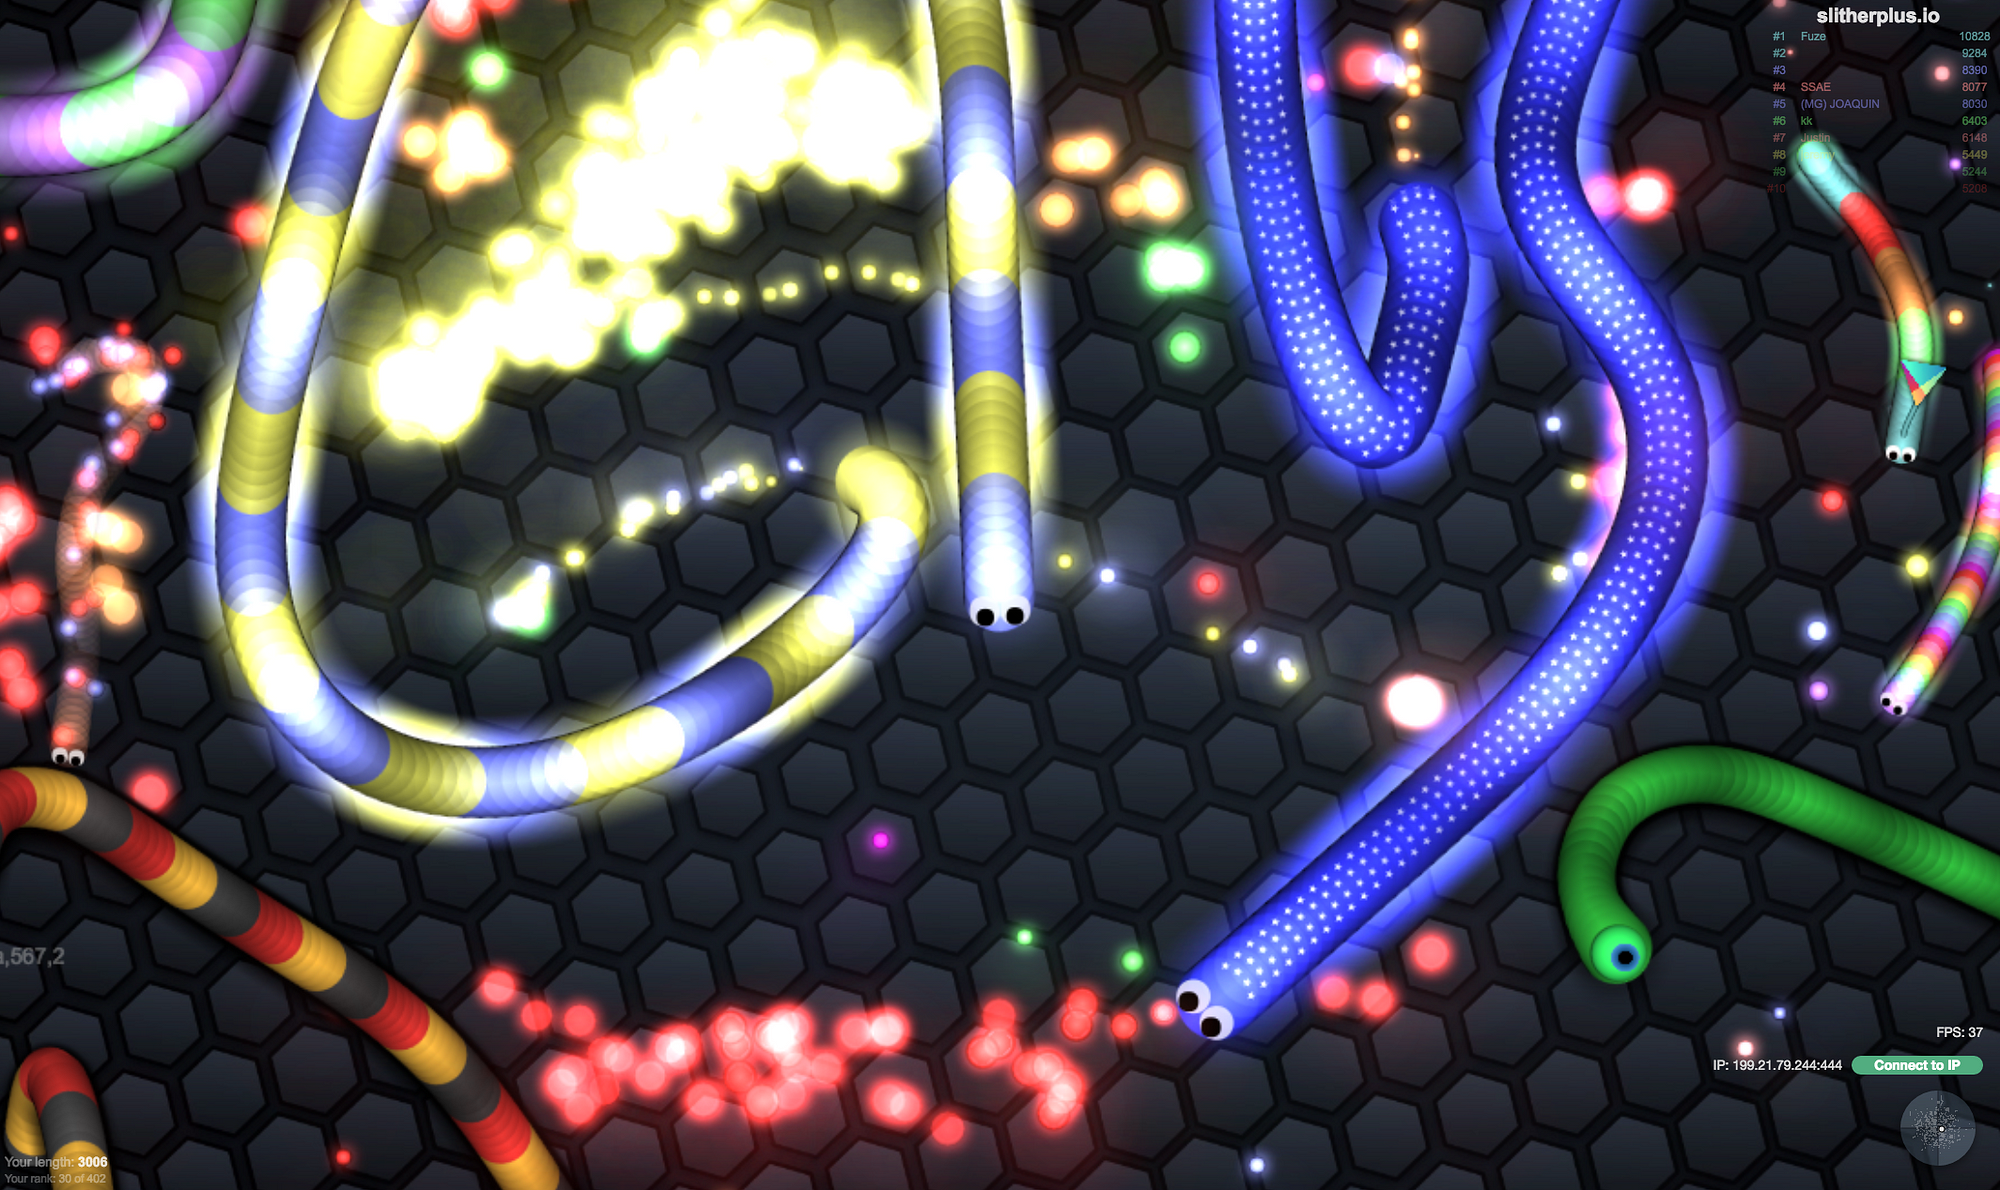 slither-io-hacking